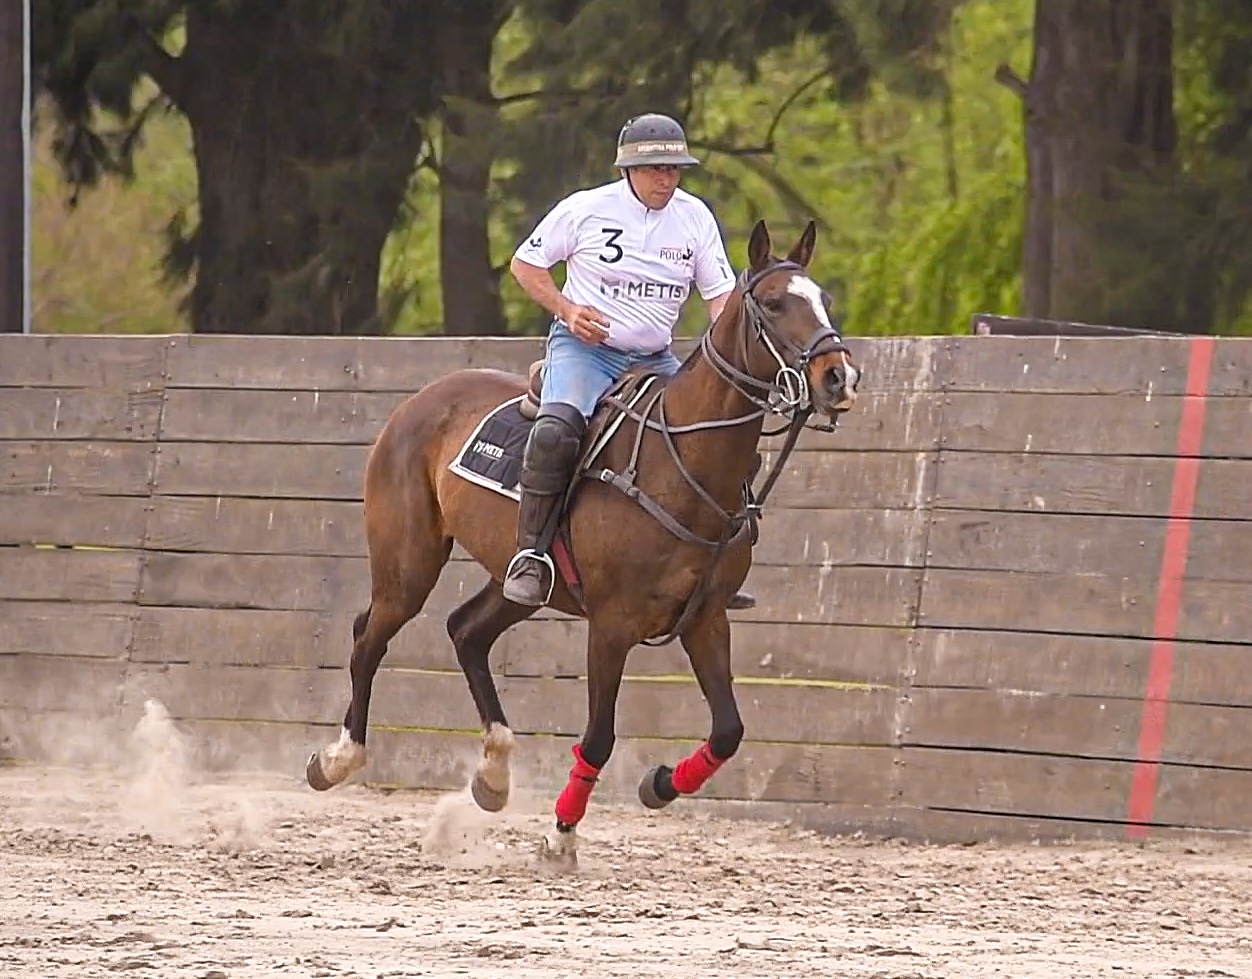 polo pony training in arena polo field